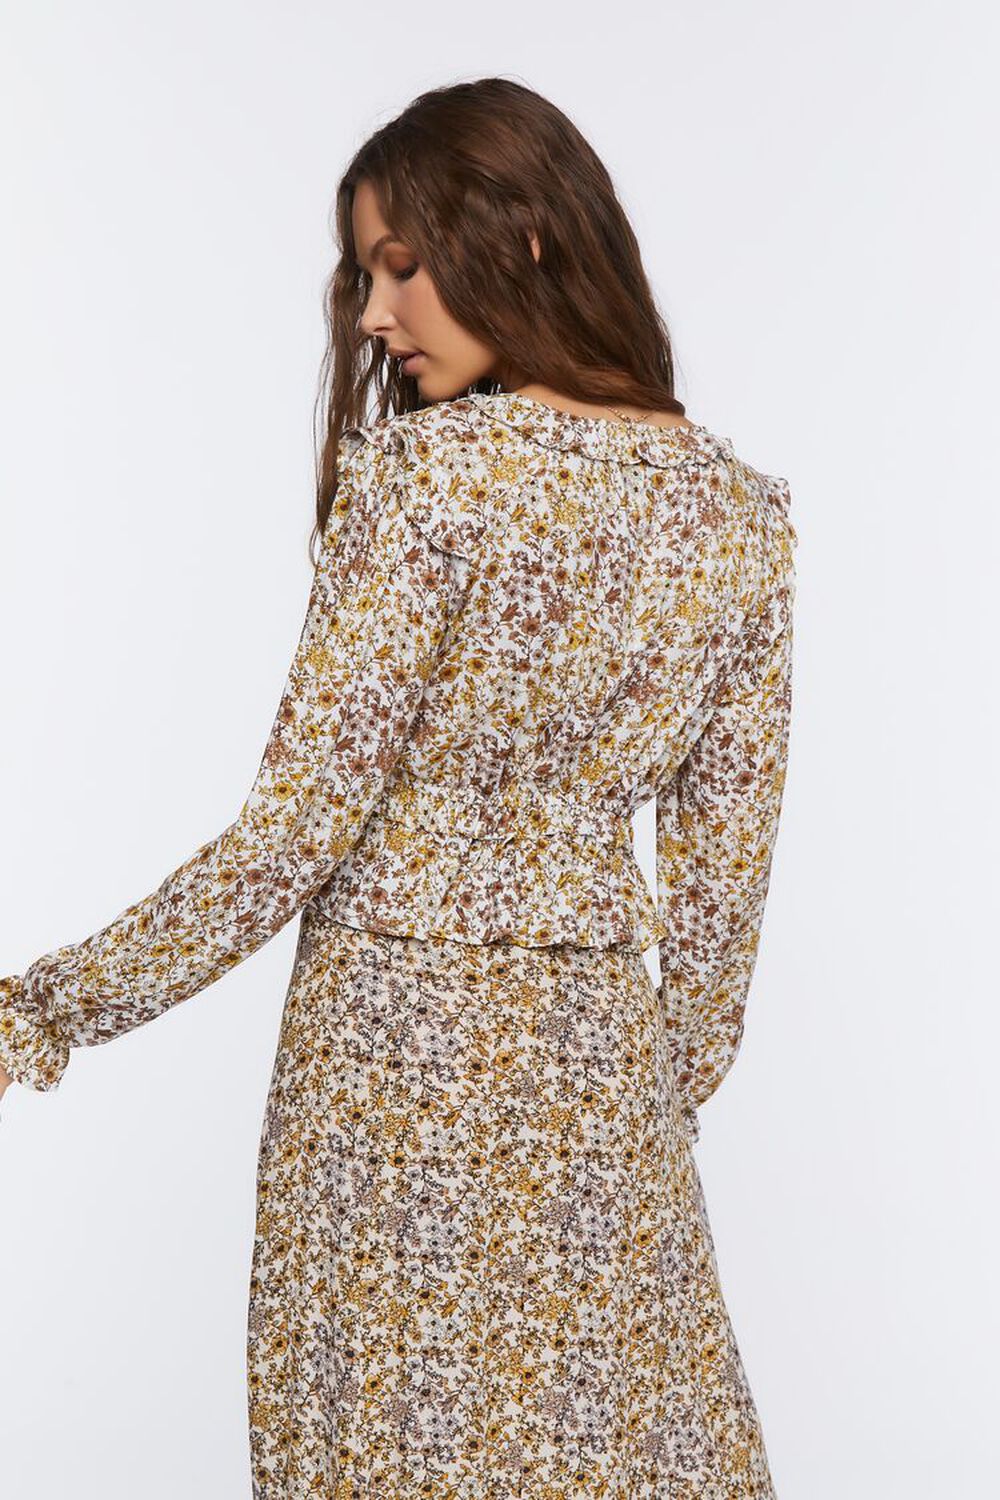 YELLOW/MULTI Tie-Front Floral Print Top, image 3